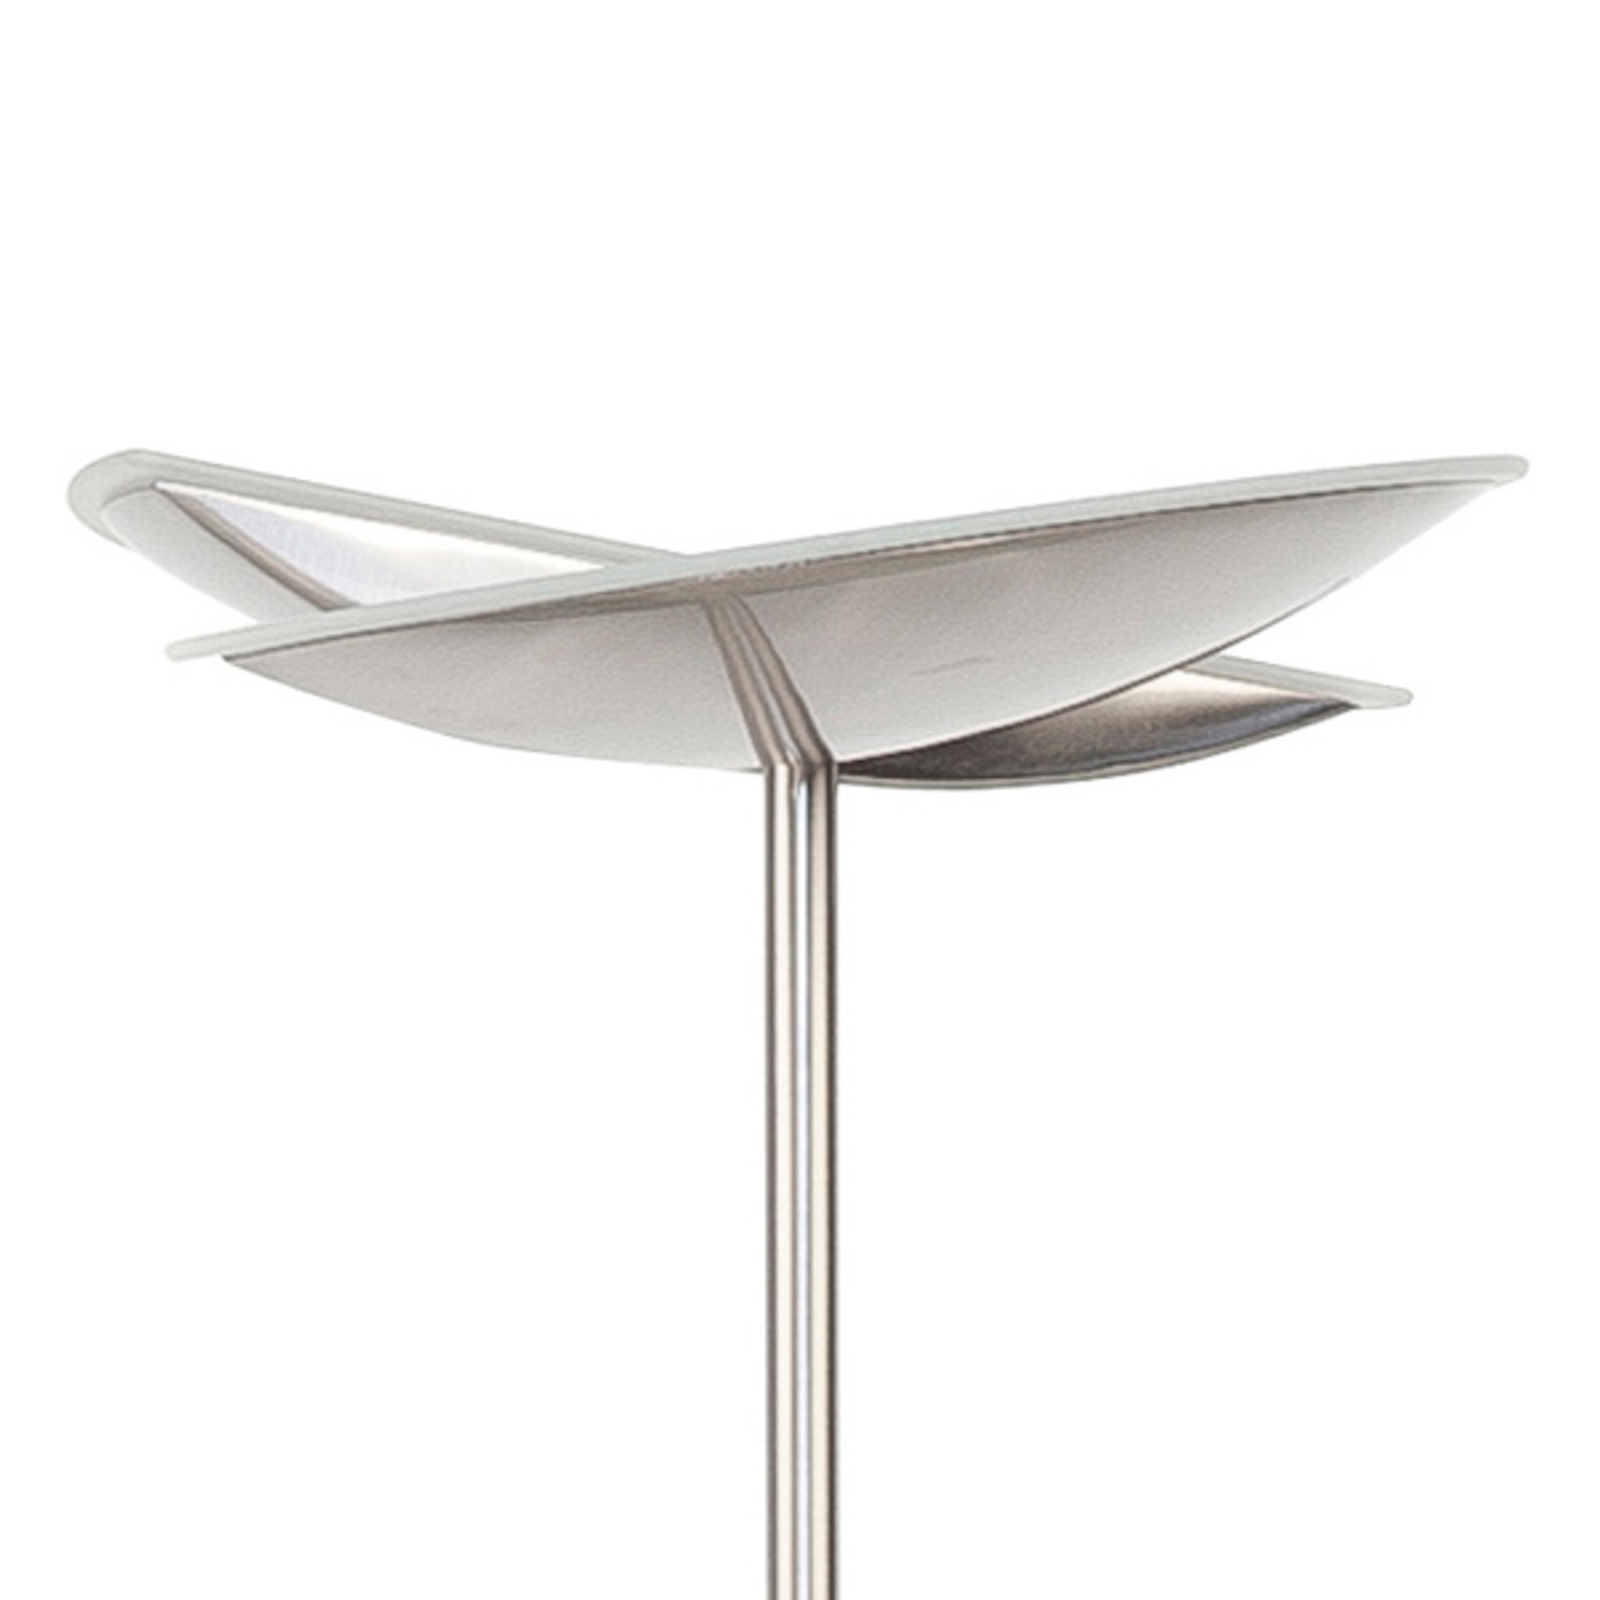 Sapporo LED floor lamp with two-part lampshade